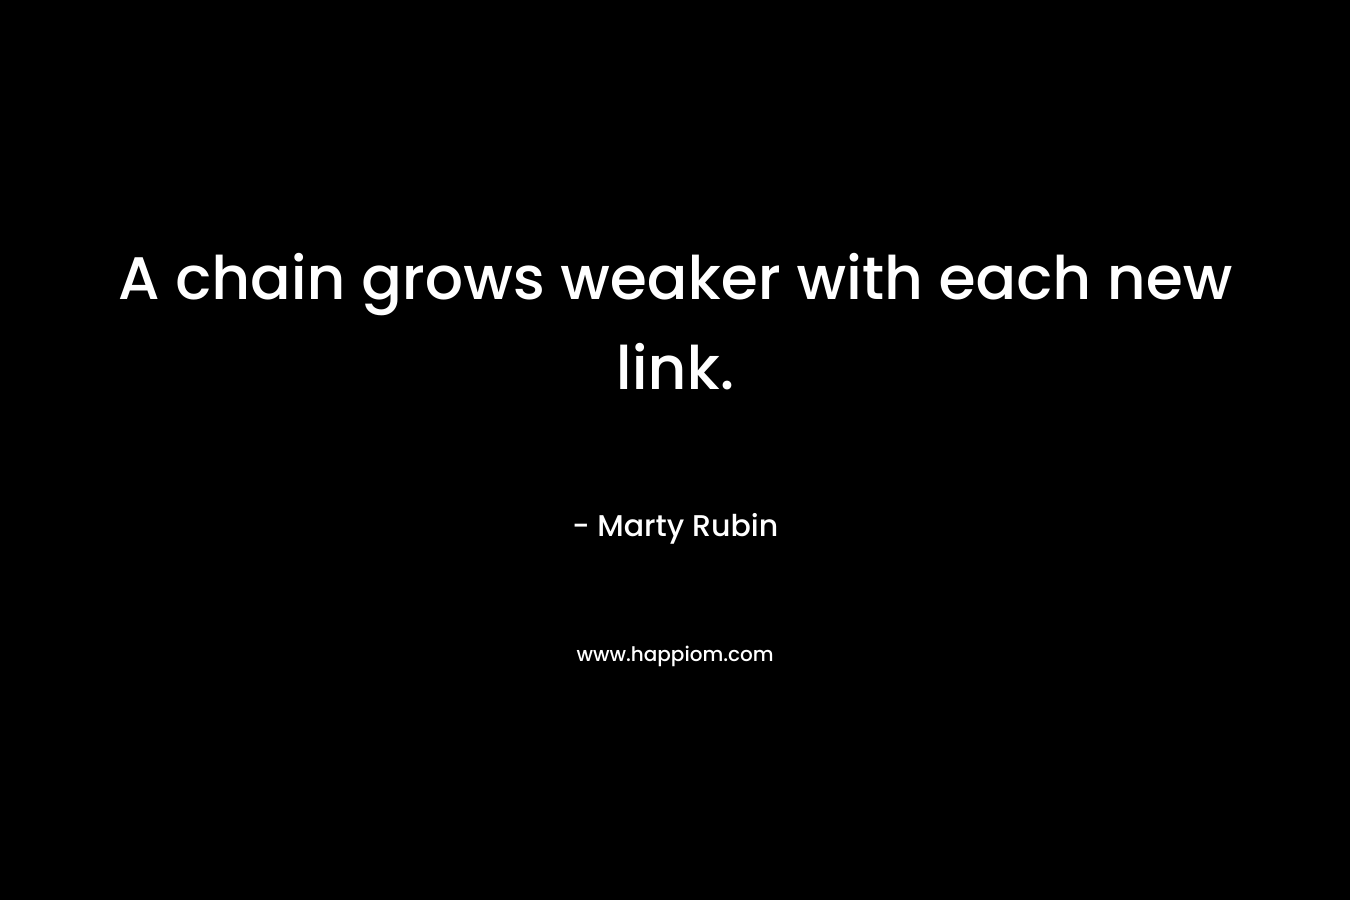 A chain grows weaker with each new link.